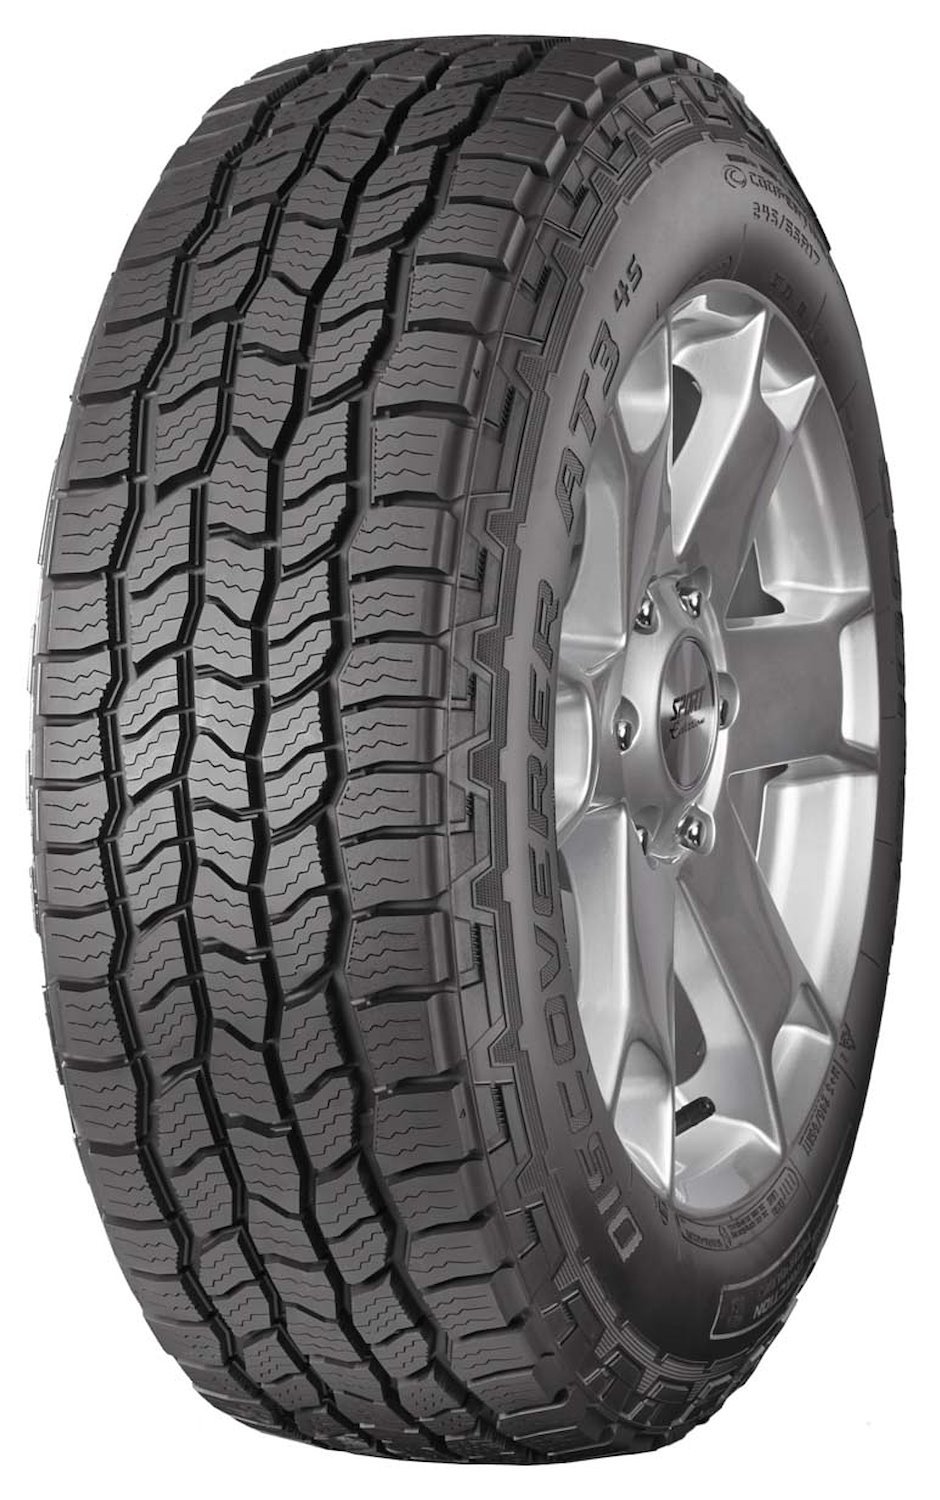 Discoverer AT3 4S All-Terrain Tire, 265/70R15